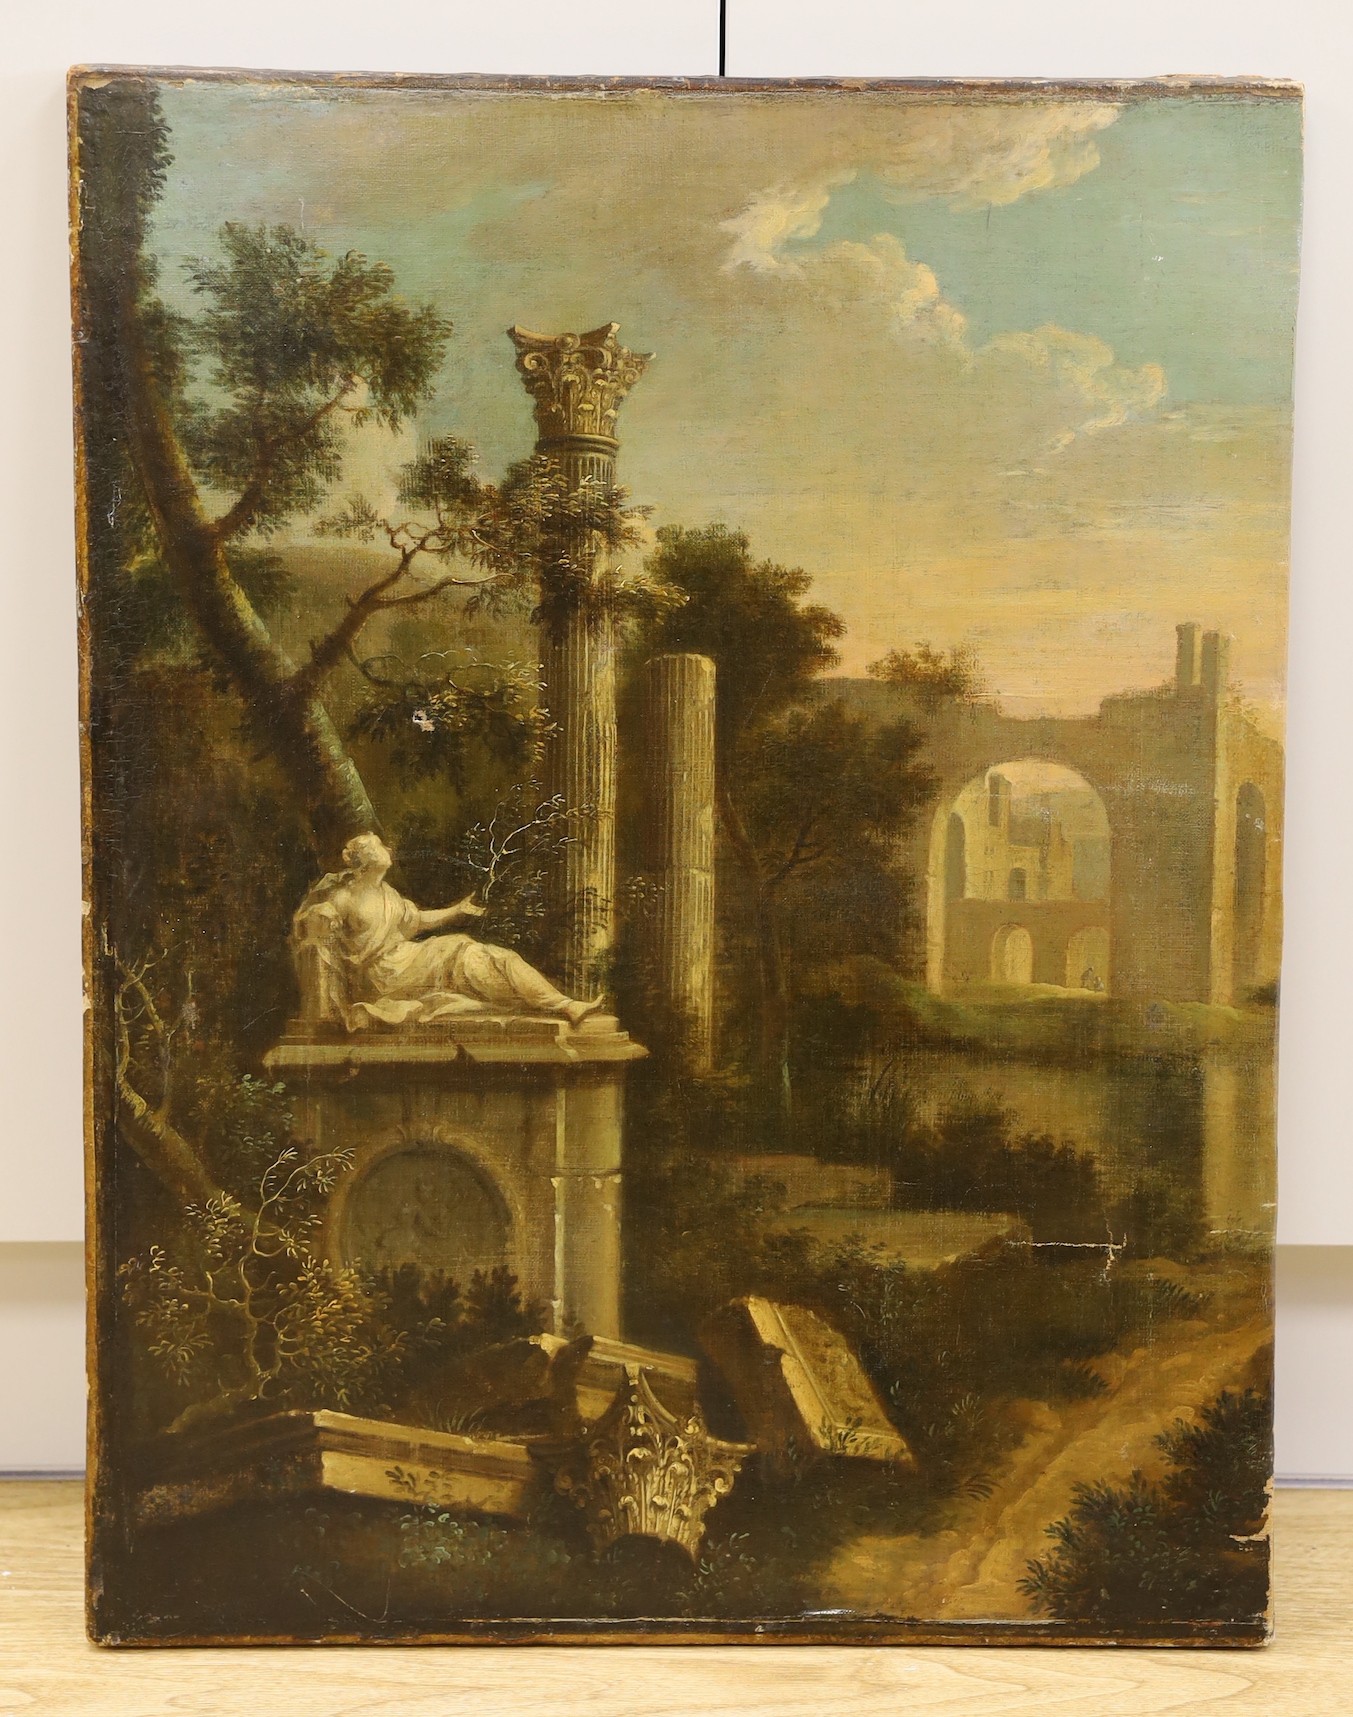 Early 19th century English School, oil on canvas, Classical ruins, 72 x 55cm, unframed